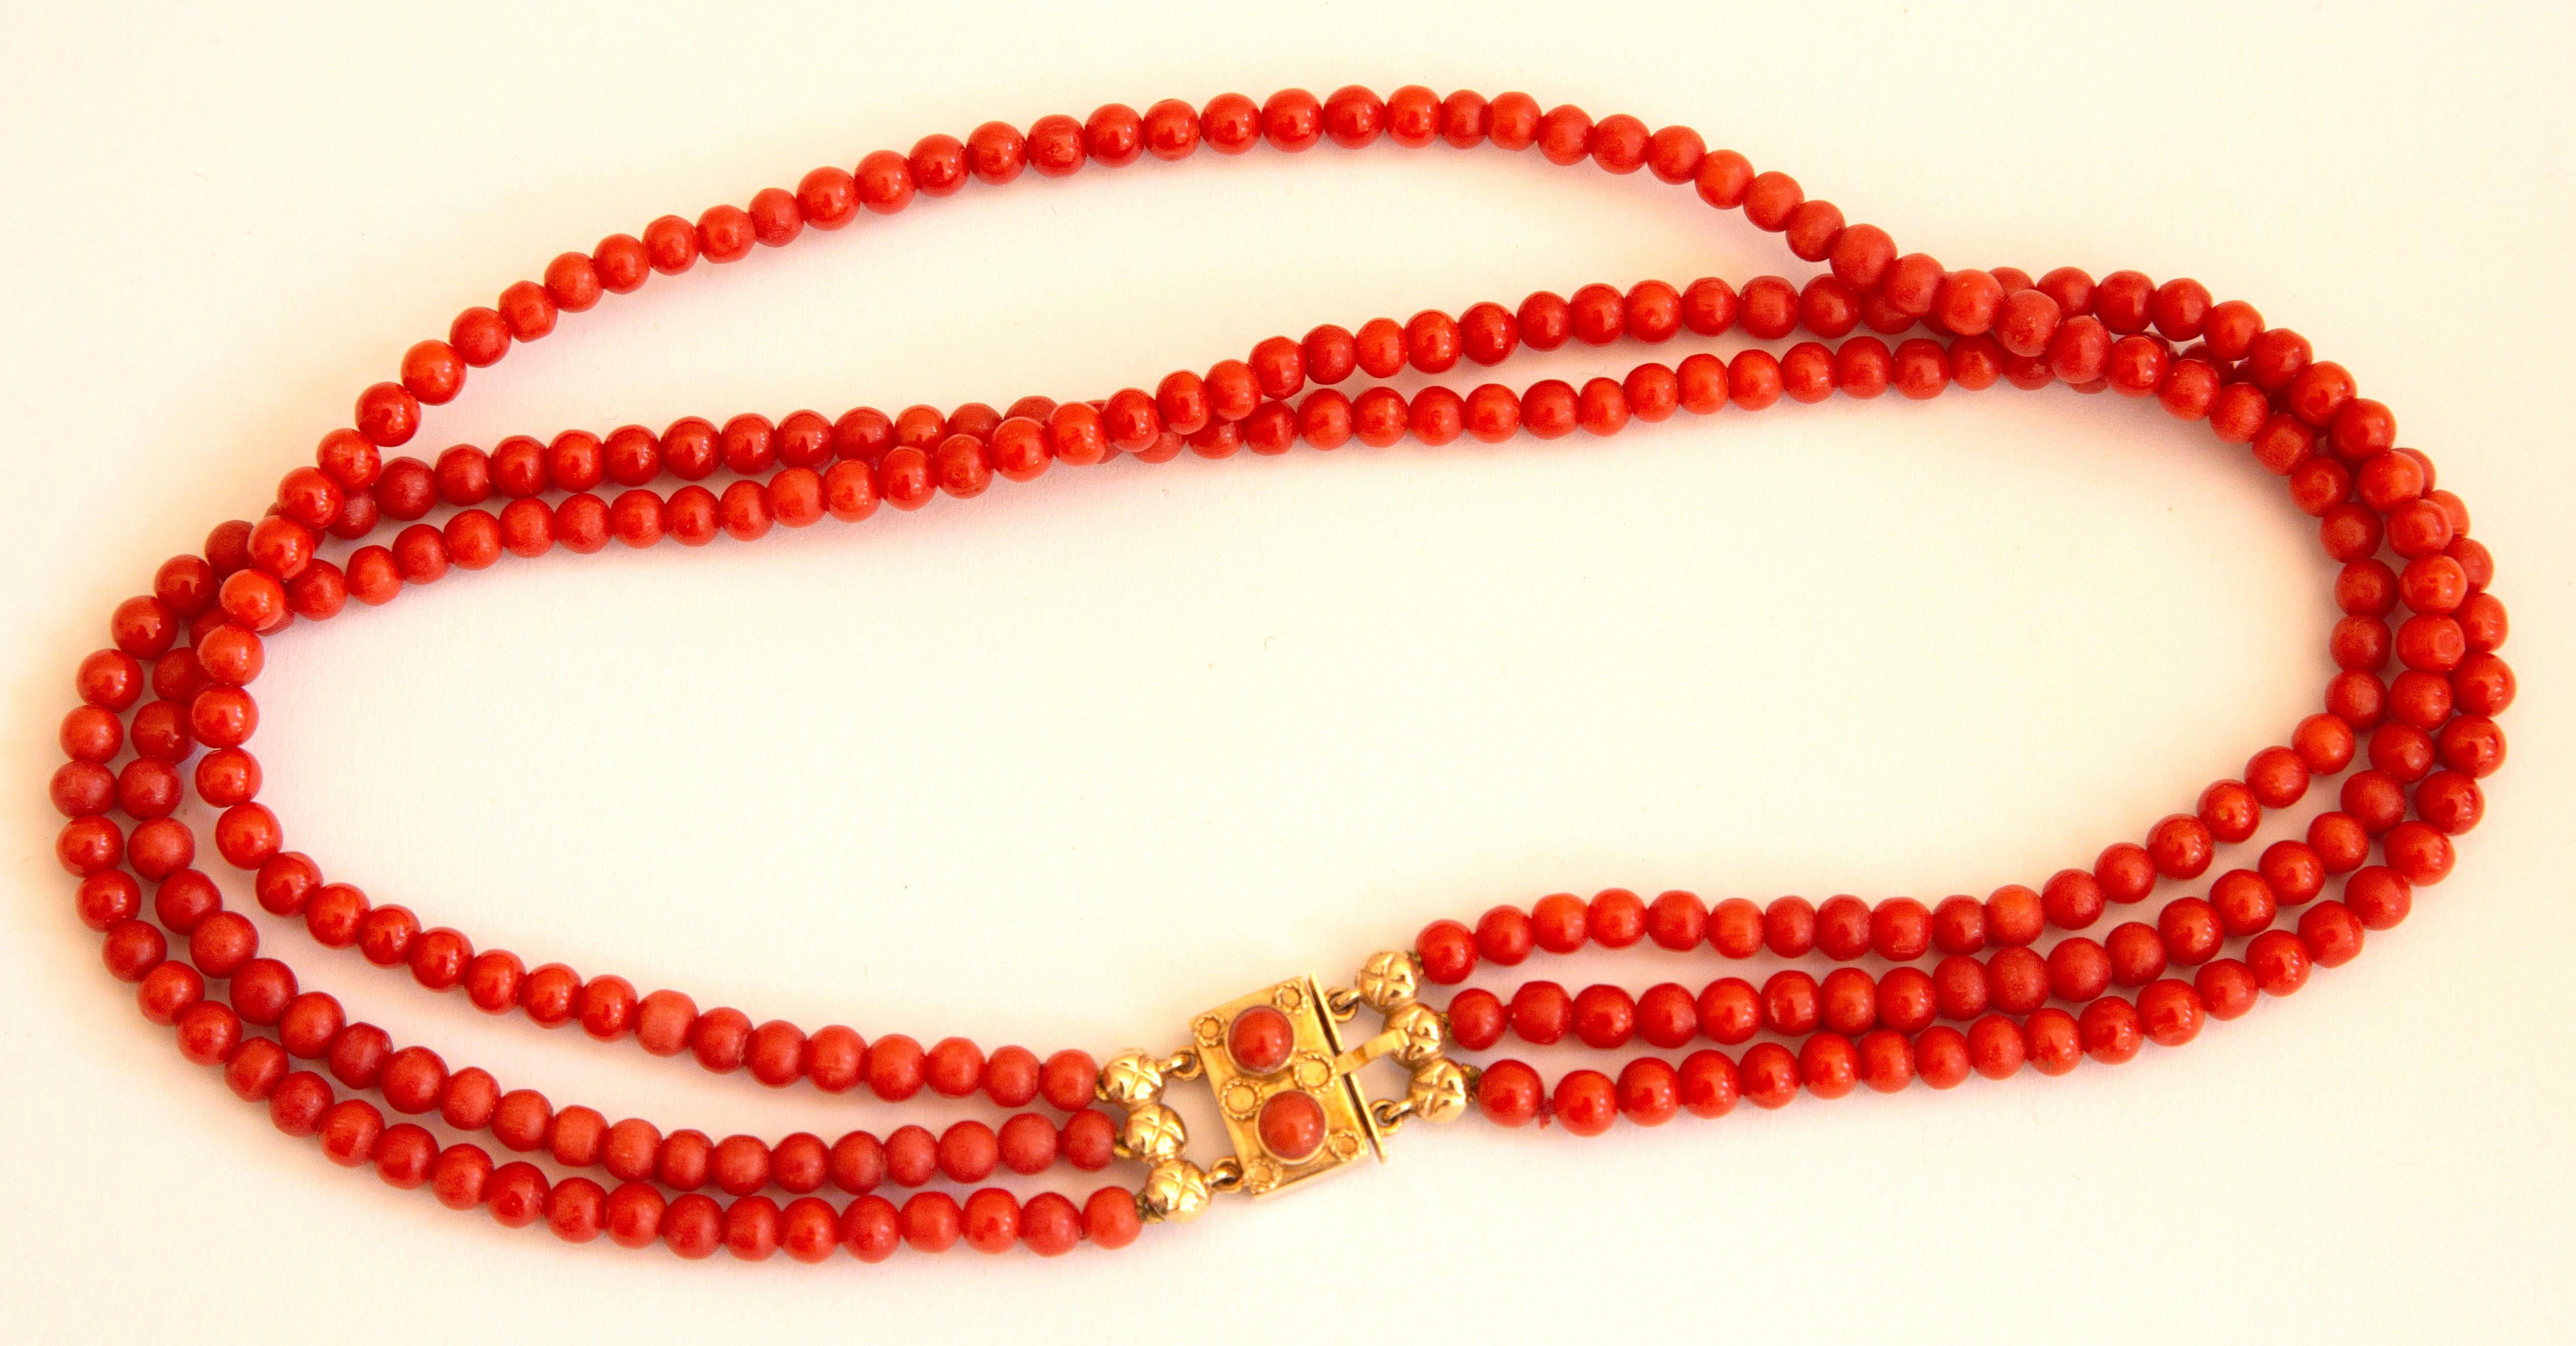 An antique necklace made of natural red coral beads with 14 karat golden clasp. The bracelet features three strands of round - shaped beads. The diameter of the beads is ca. 5 mm and the color is red. The clasp features a rectangular shape with two